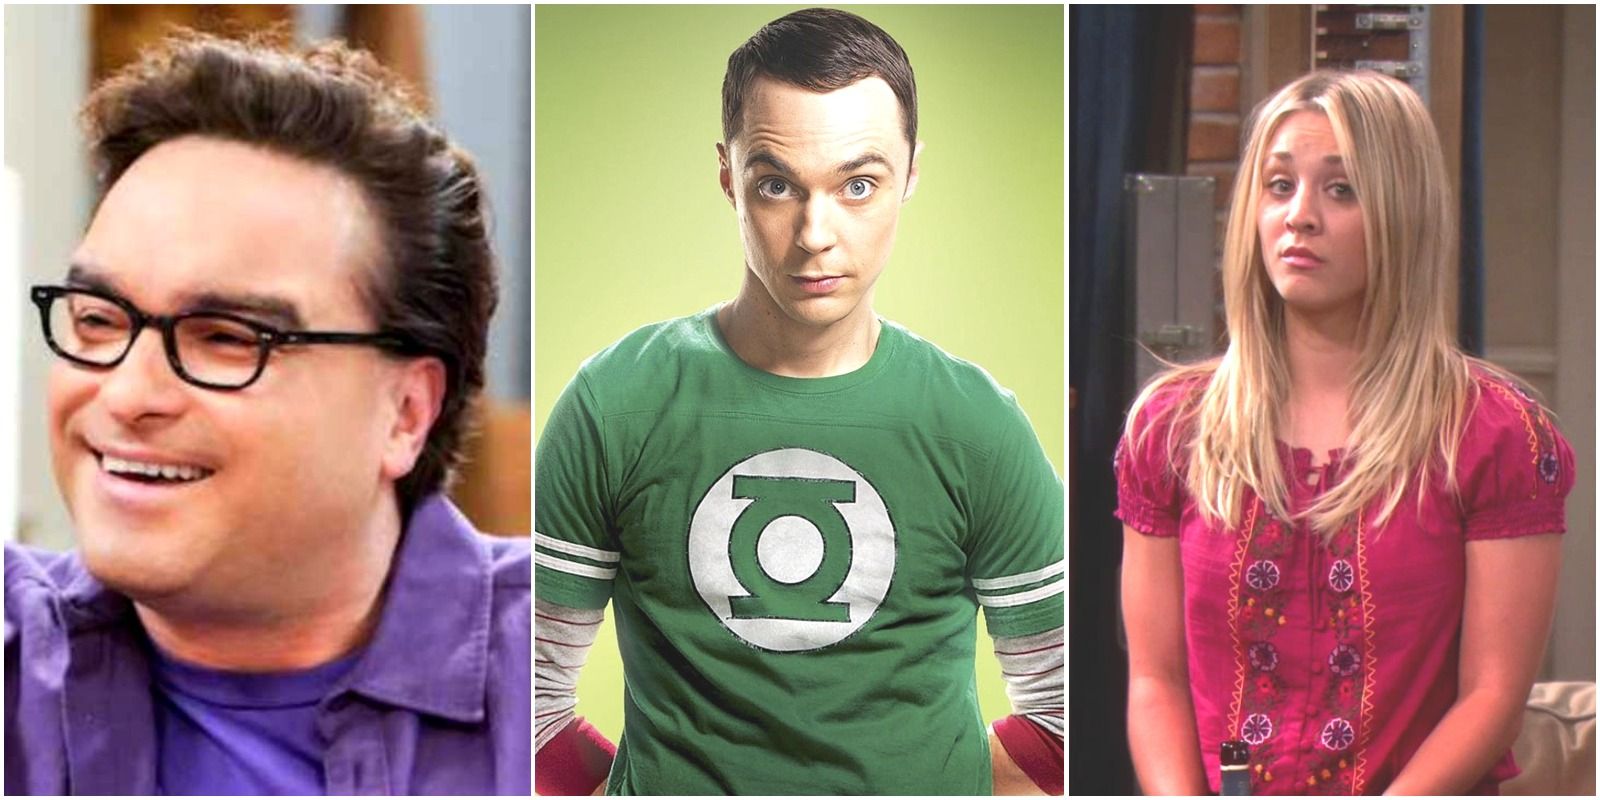 A split image of Leonard, Penny, and Sheldon in The Big Bang Theory